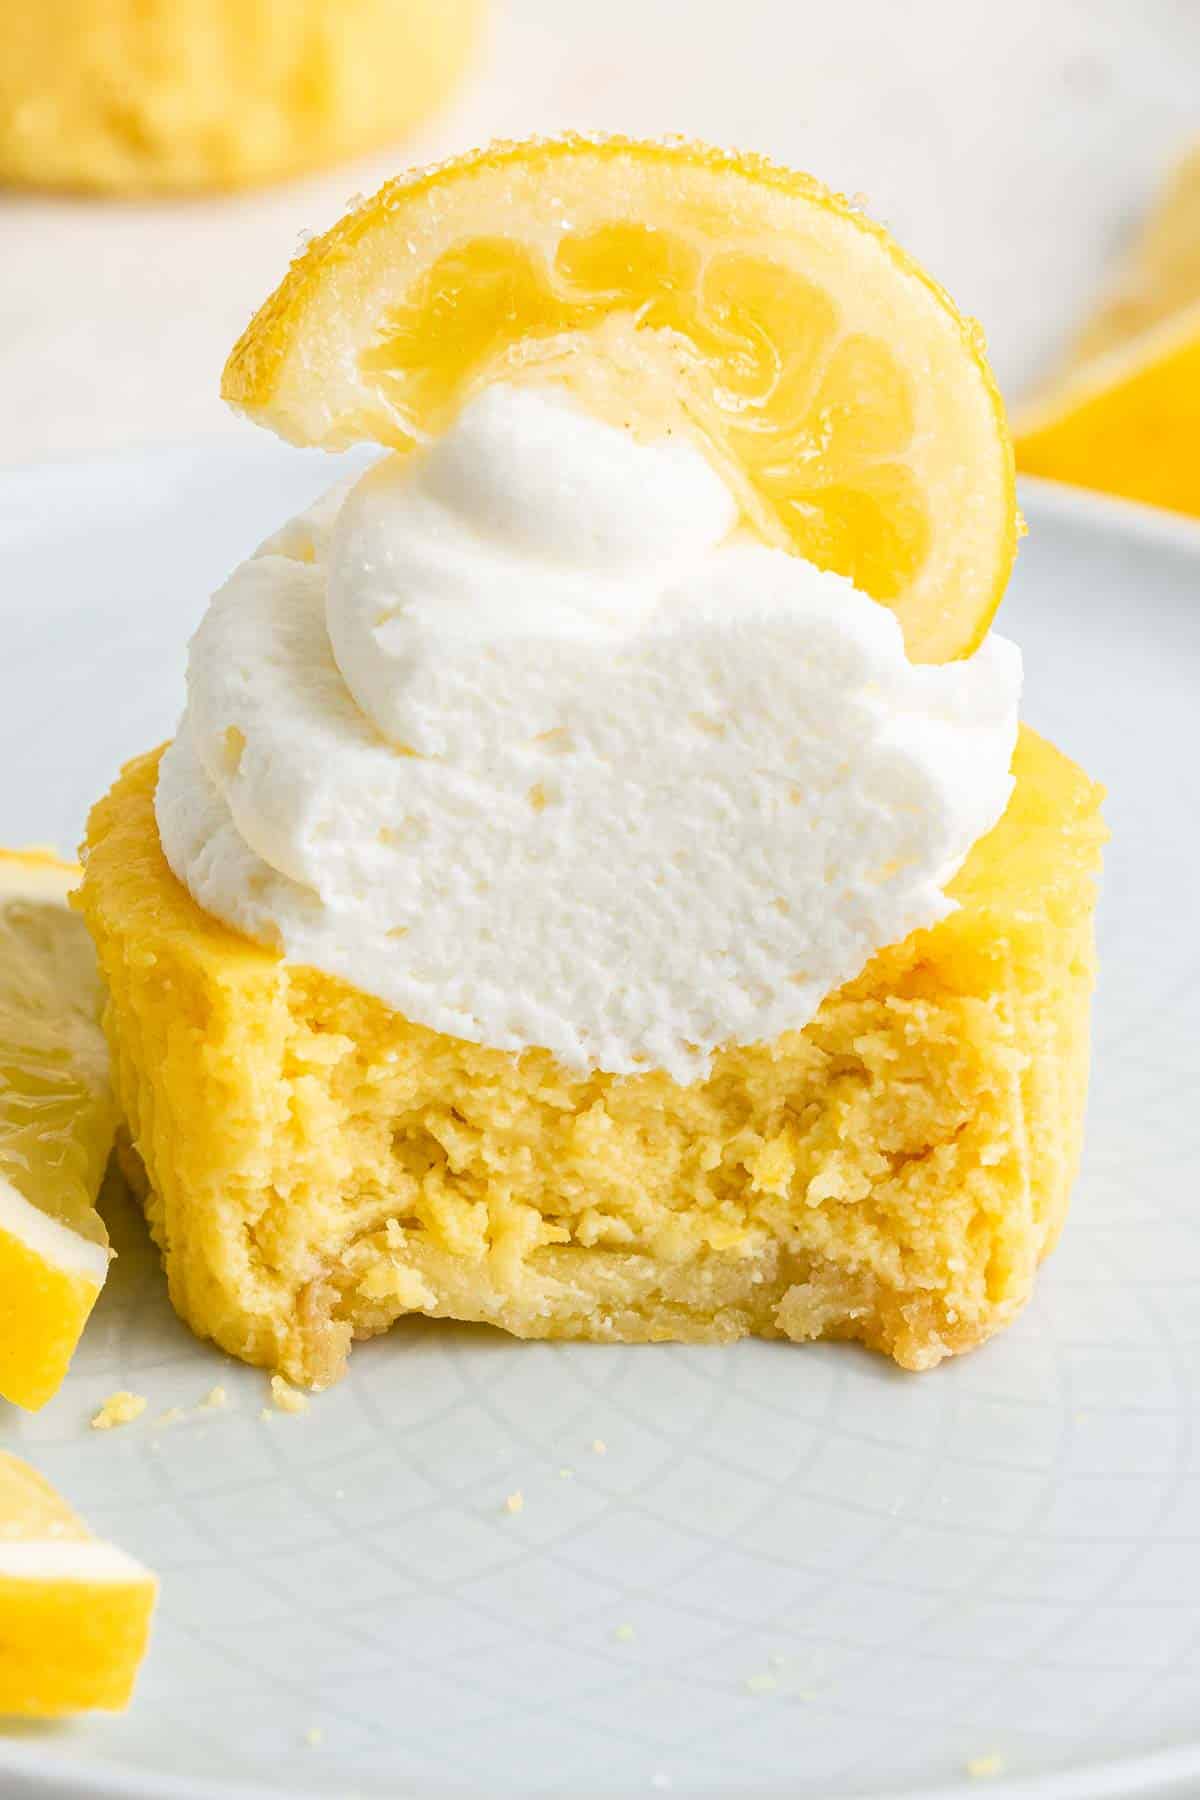 Close up of yellow cupcake cheesecake with whipped cream and lemon slice on top, cut in half.